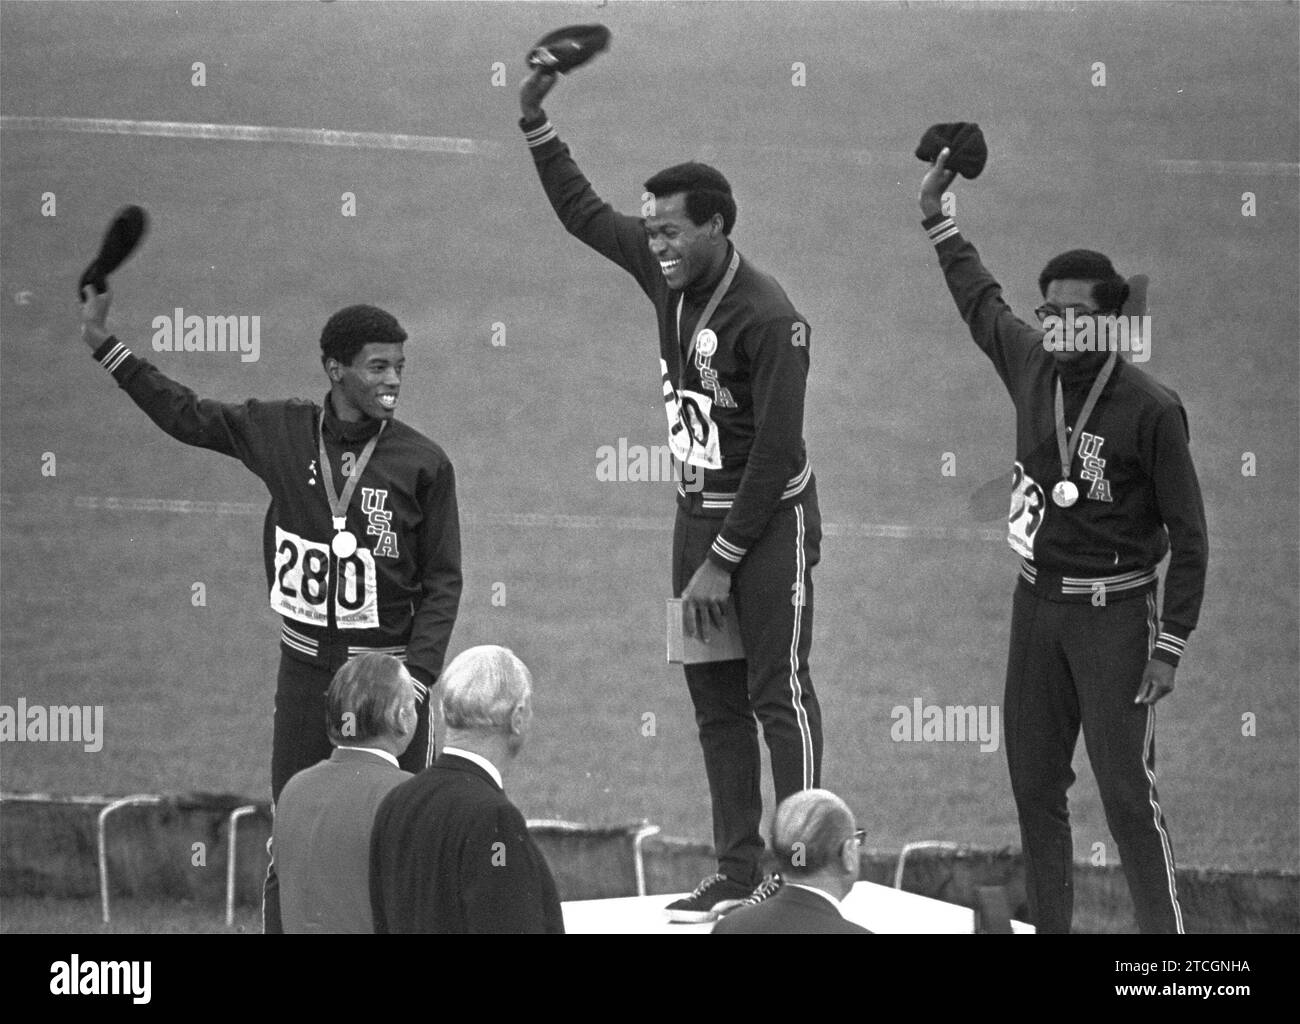 MEXICO. October 18, 1968. Photo of the podium with the winning American athletes in 400 meters. From left: G. Larry James silver medal, Lee Evans gold medal and Ron Freeman bronze medal. No signature. Credit: Album / Archivo ABC Stock Photo